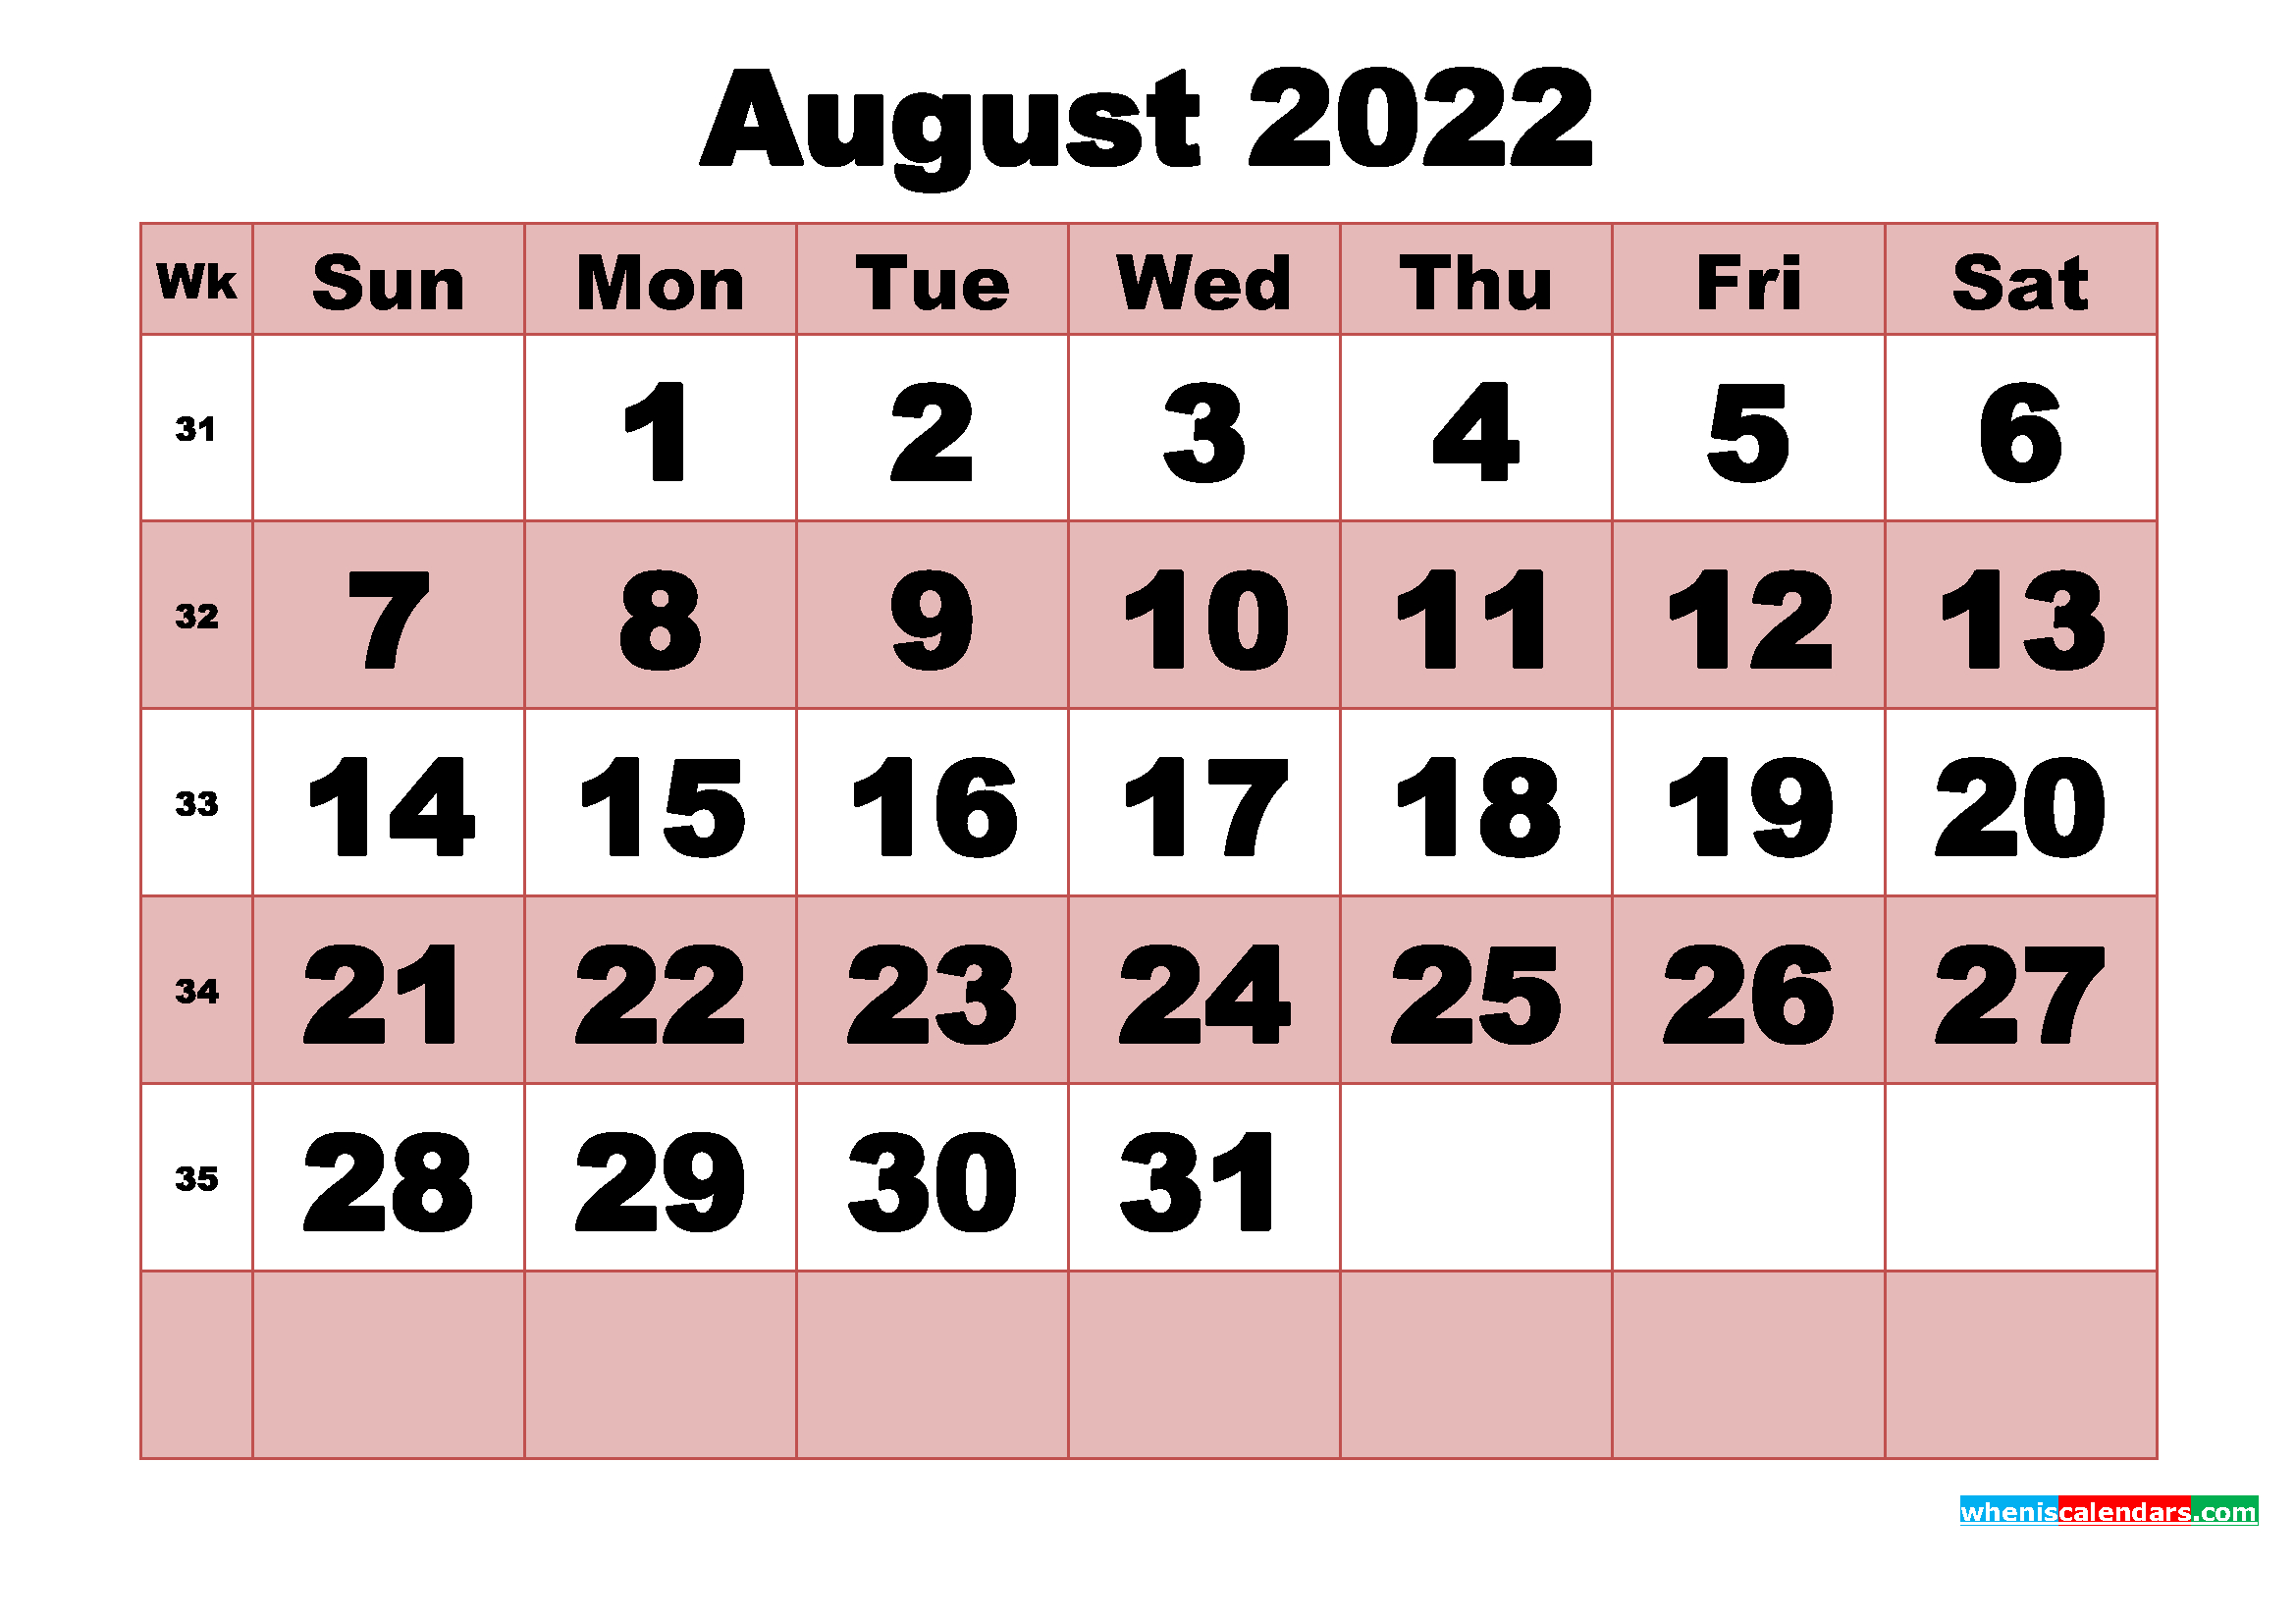 Free Printable Monthly Calendar August 2022 | Free Printable 2020 intended for Printable August 2022 Calendar